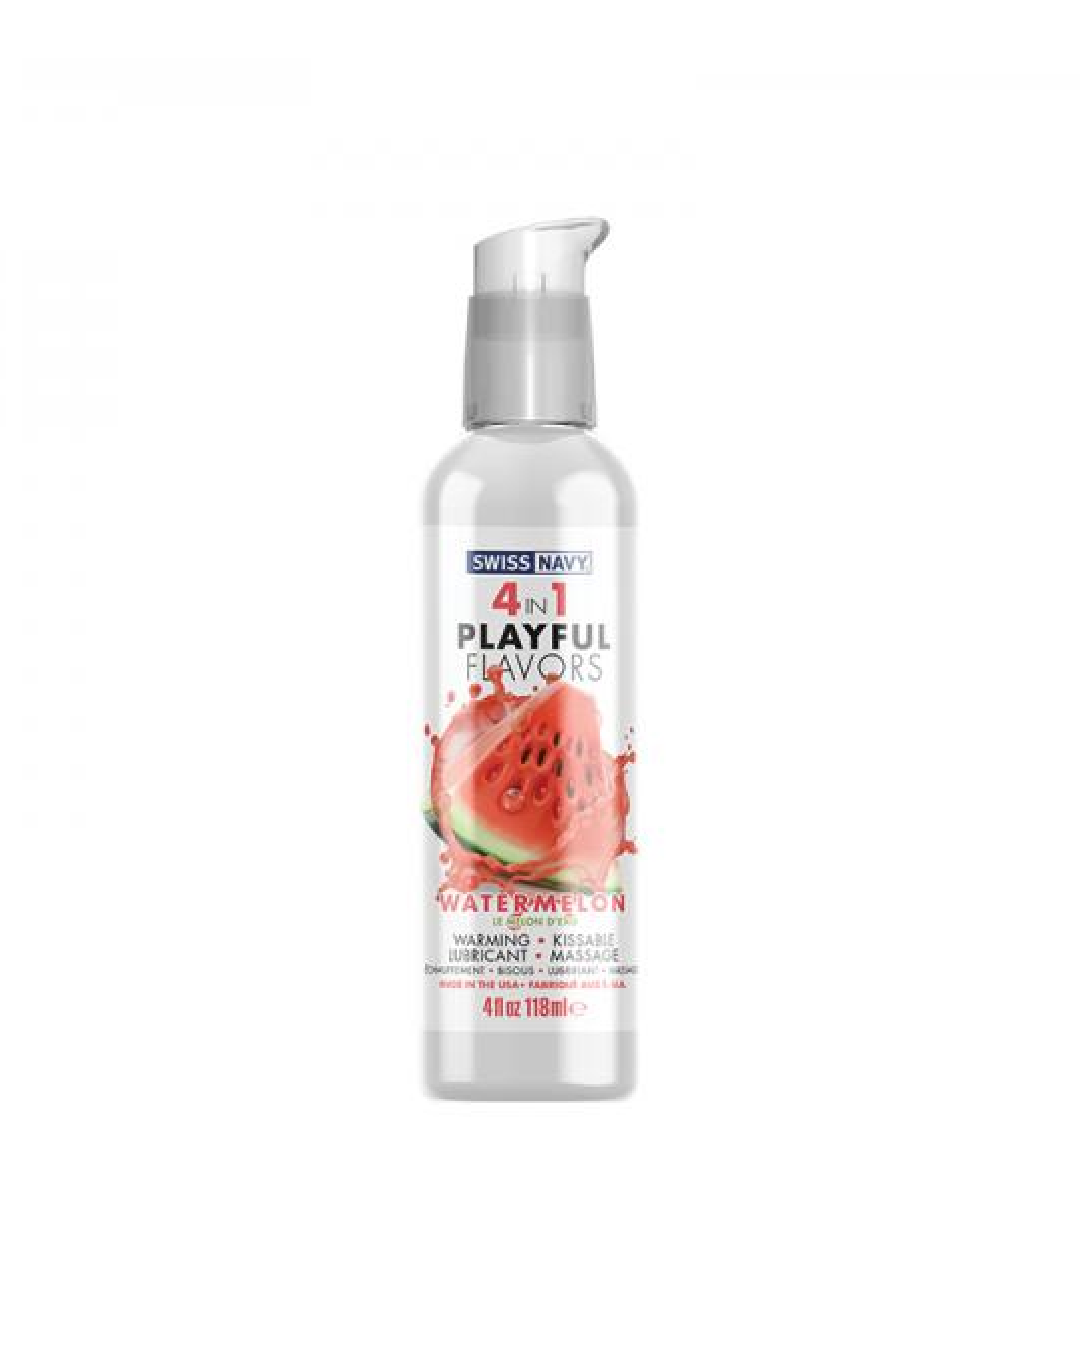 Playful Flavors Watermelon 4 in 1 Warming Lubricant bottle 